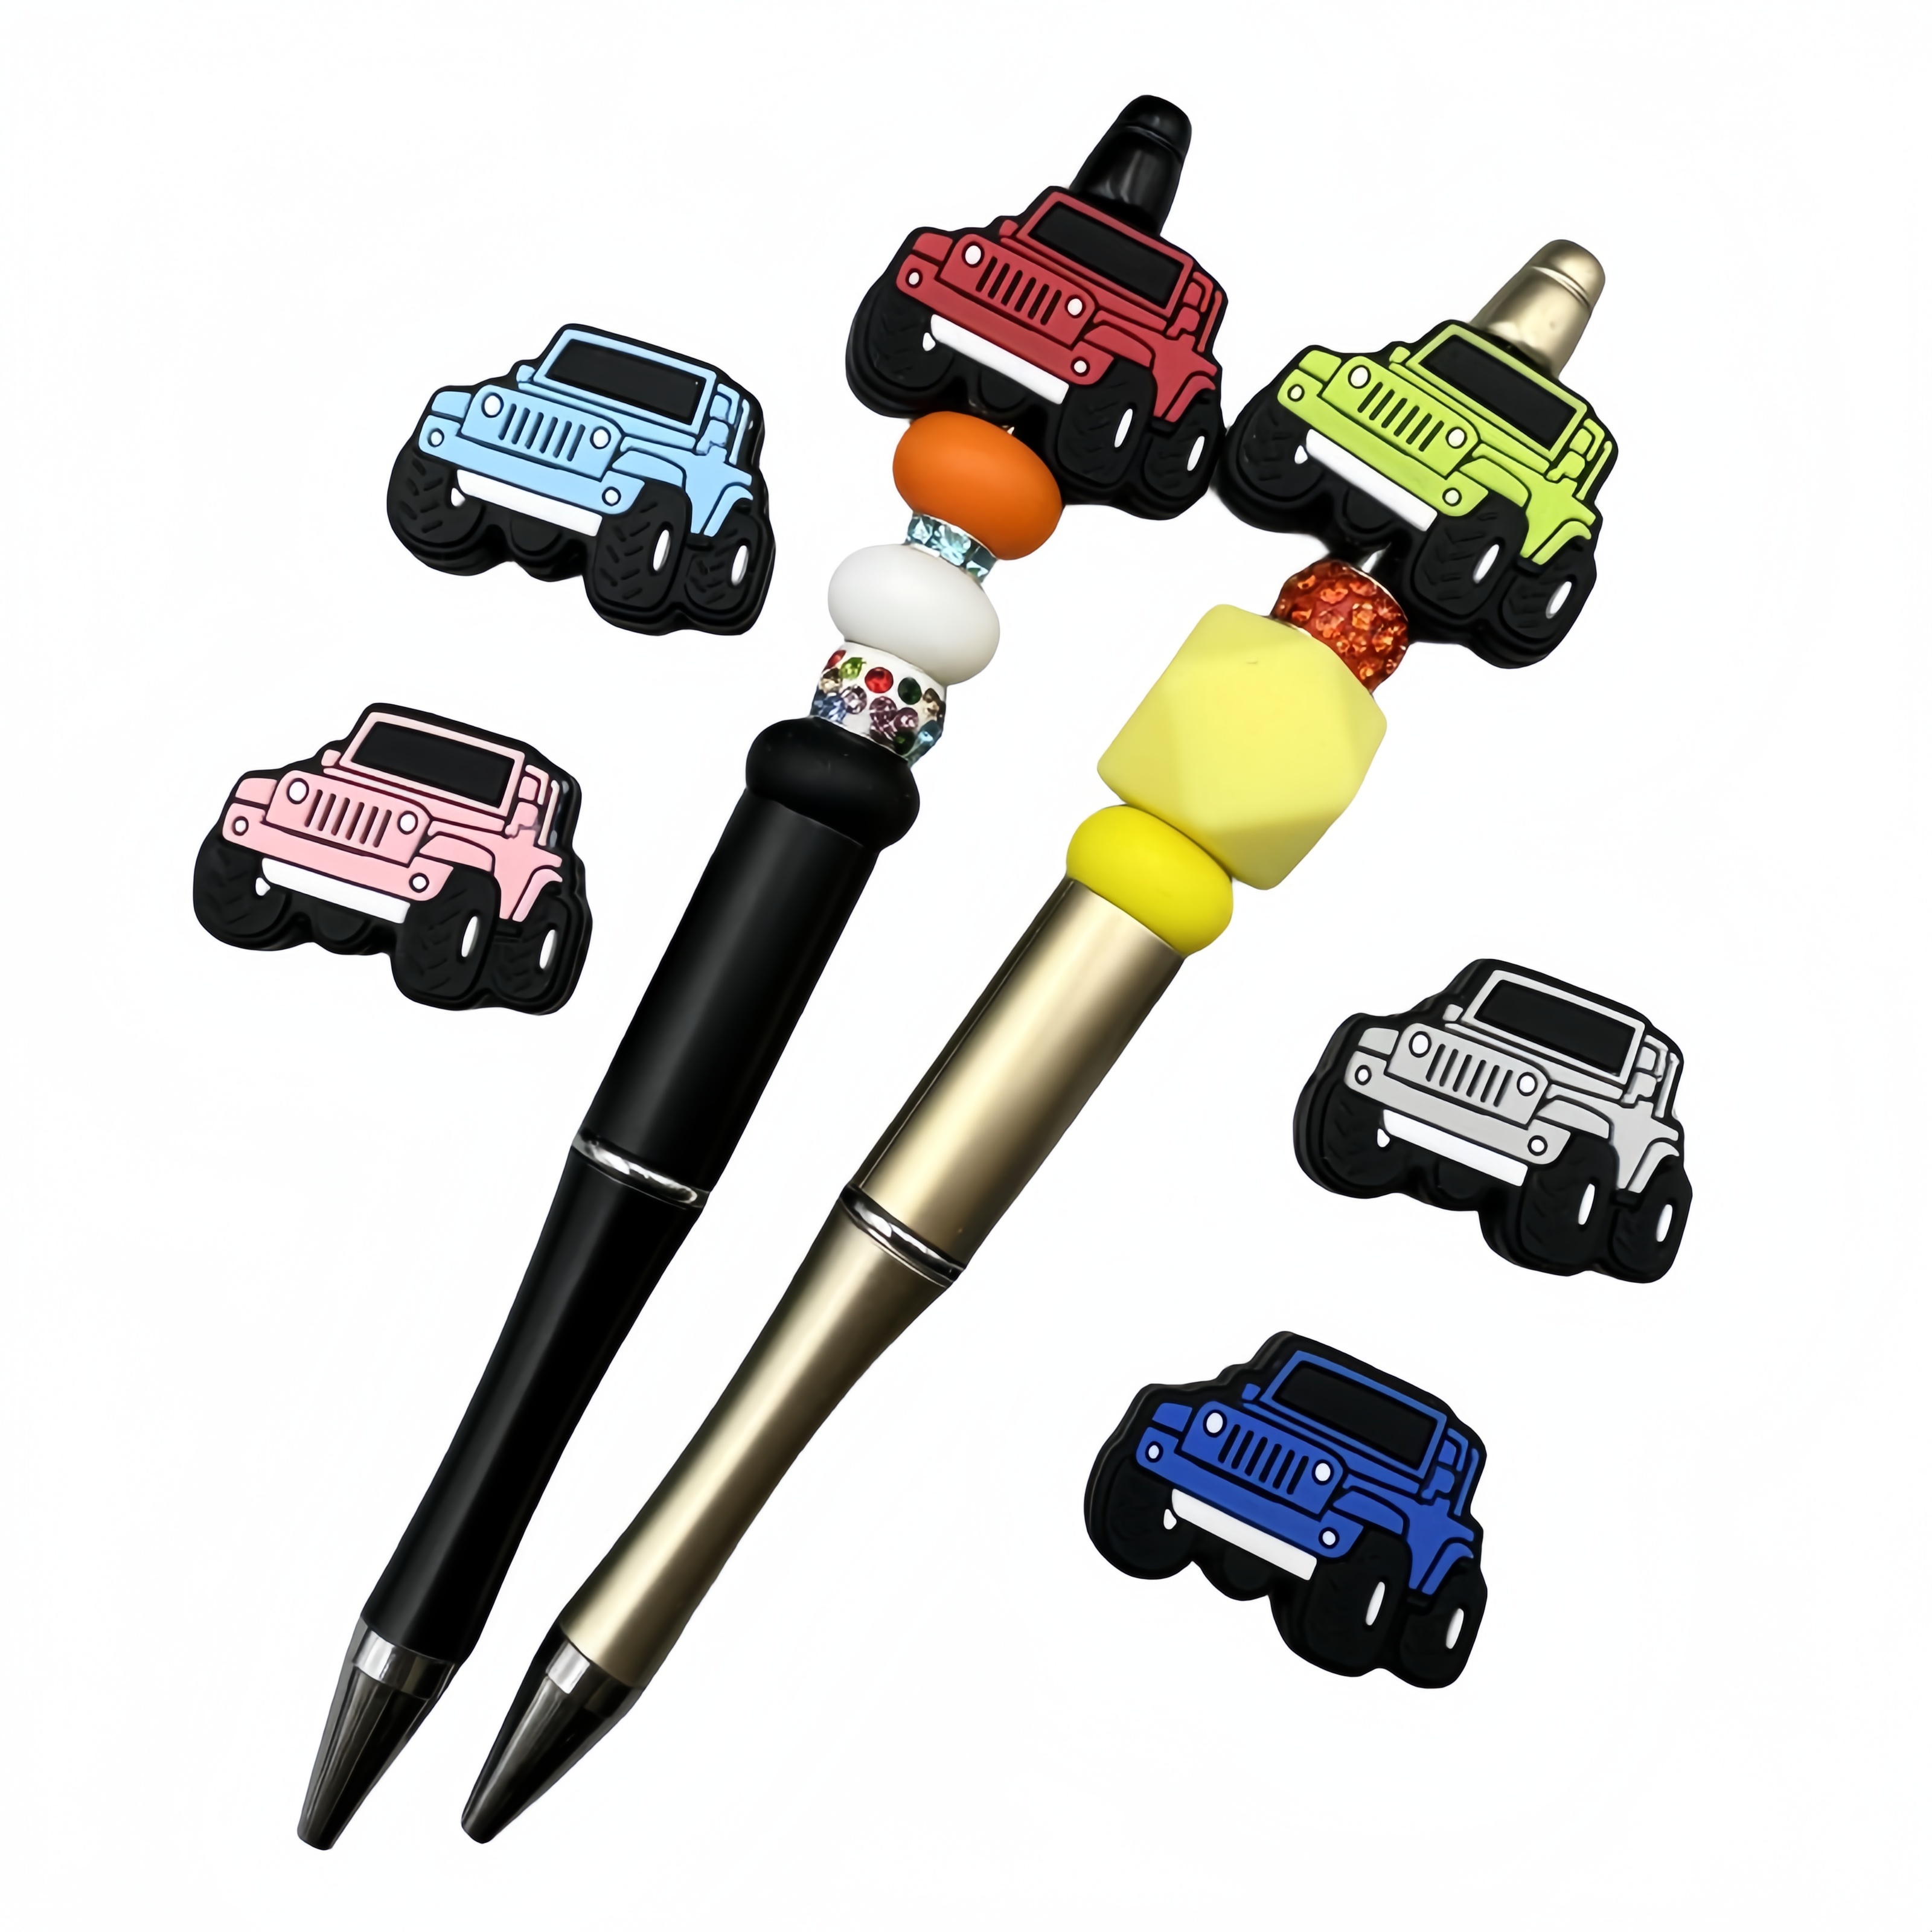 

6 Pcs New Suv Car Character Silicone Beads Loose Focus Beads For Jewelry Making Diy Pen Decoration Keychain Creative Handicraft Supplies